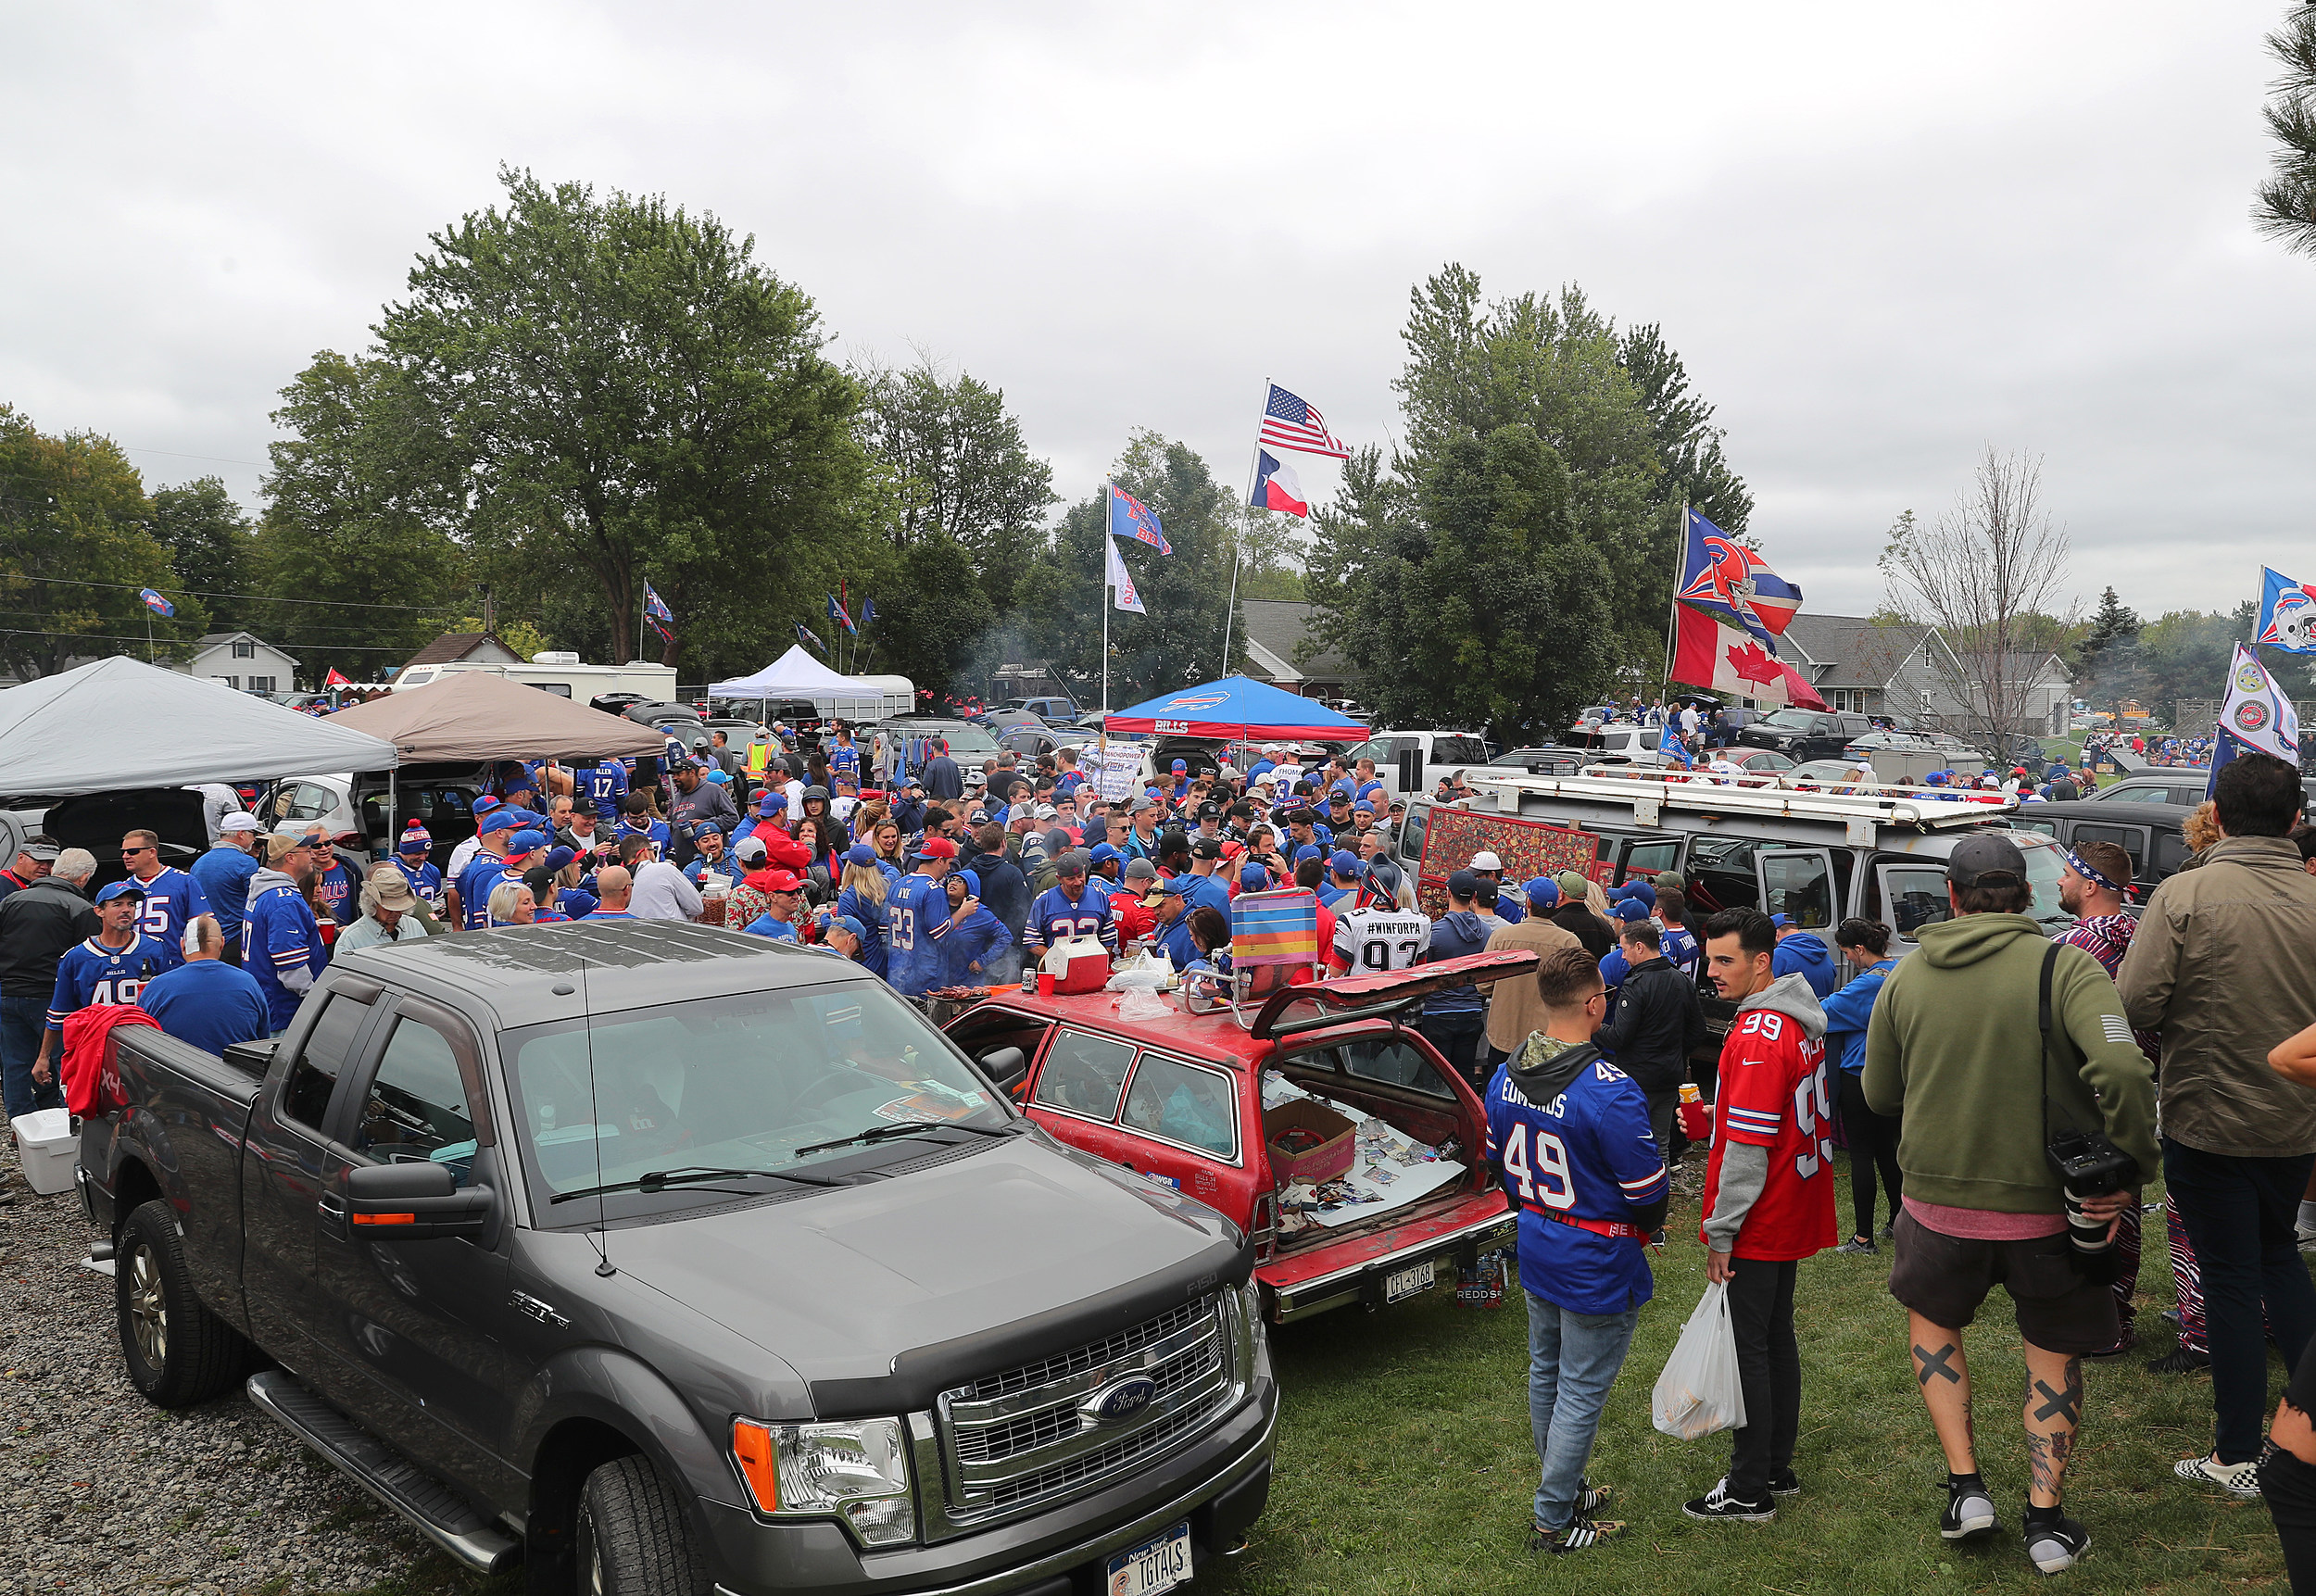 ESPN Broadcasting Live From a Bills Parking Lot in Orchard Park